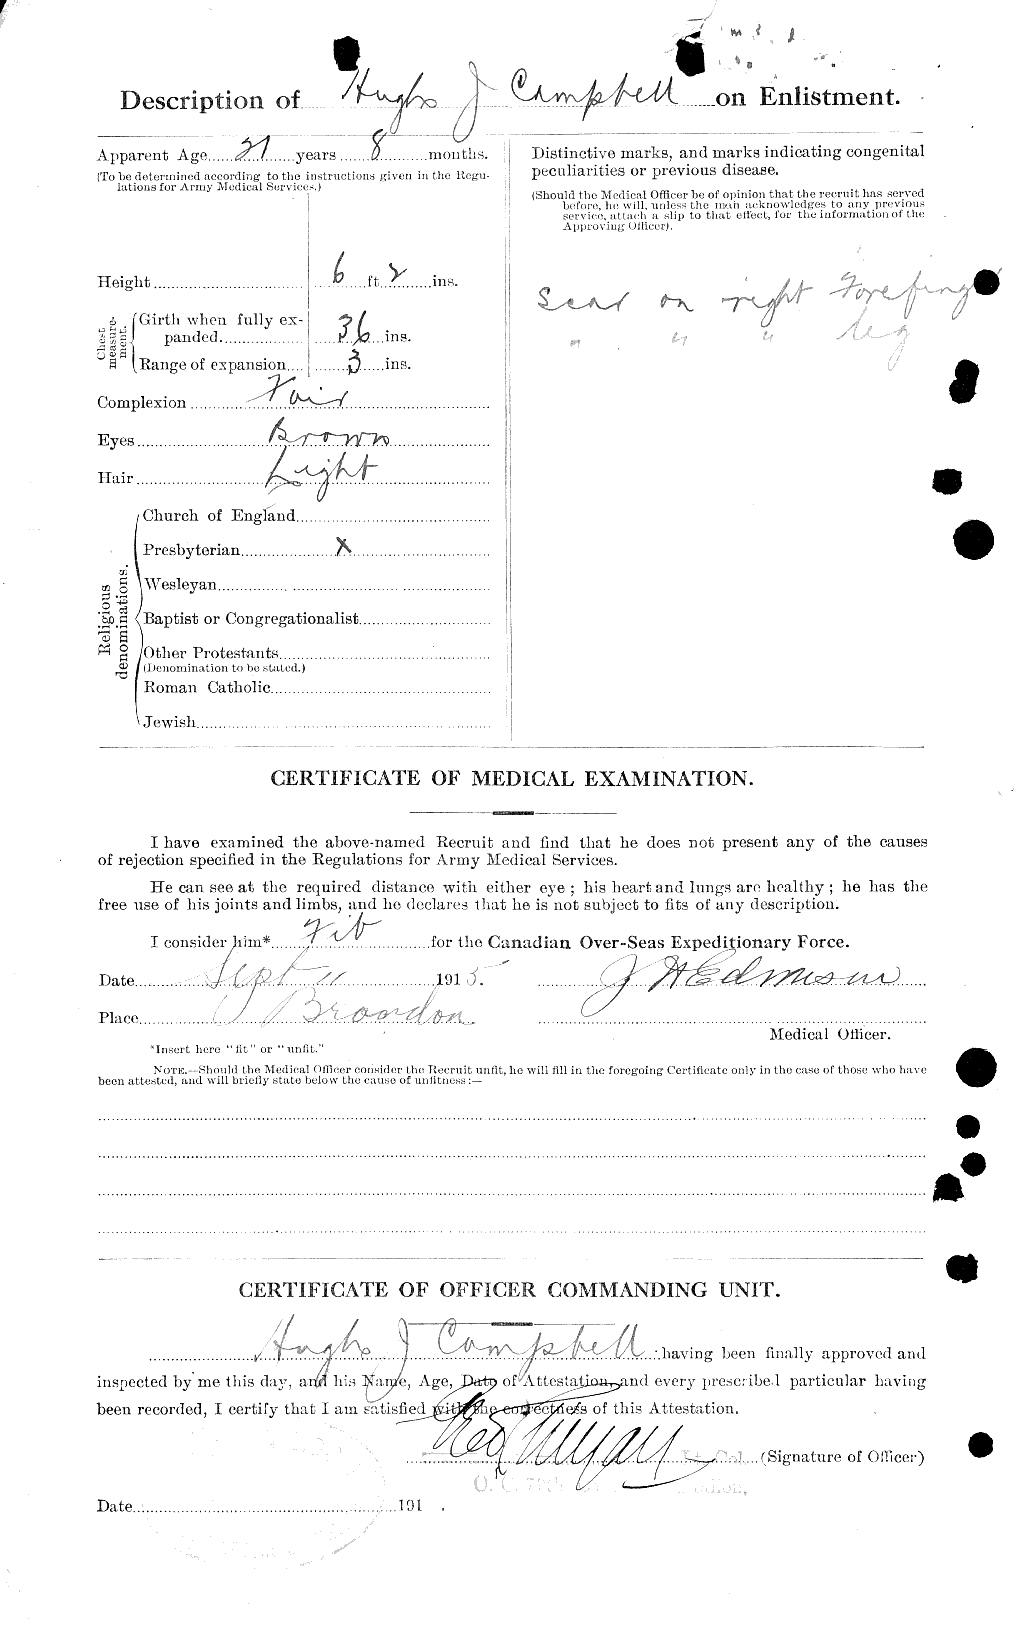 Personnel Records of the First World War - CEF 002732b